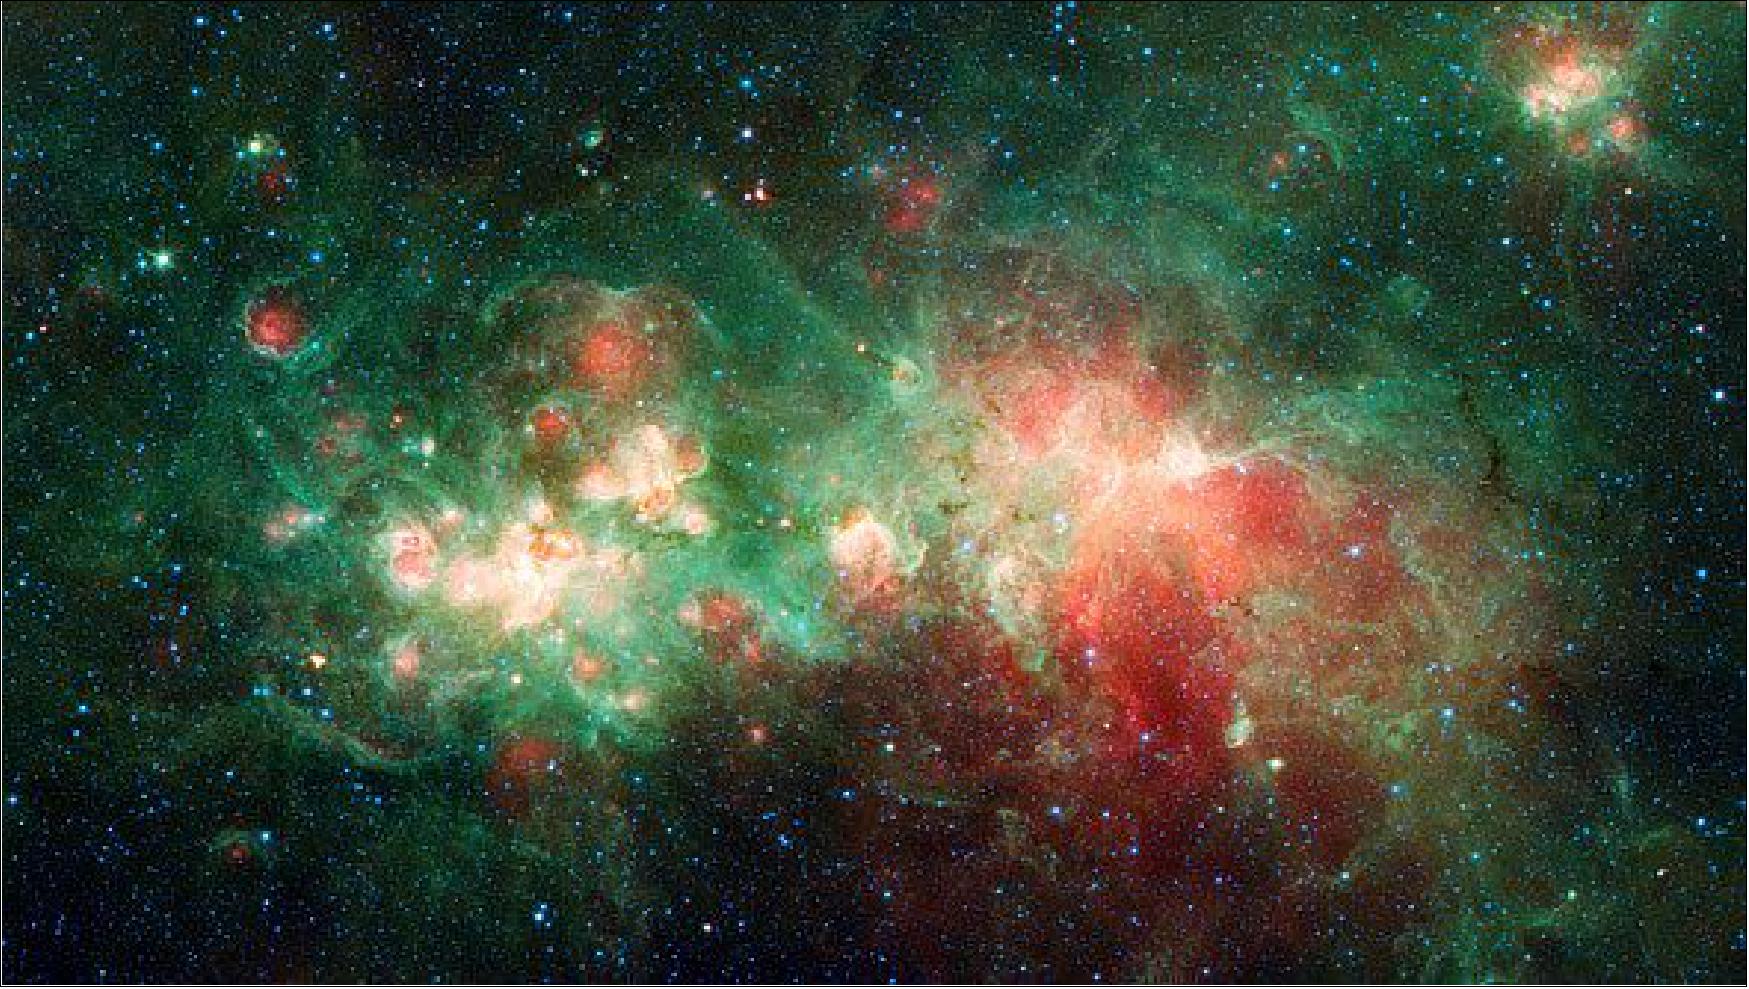 Figure 26: The nebula known as W51 is one of the most active star-forming regions in the Milky Way galaxy. First identified in 1958 by radio telescopes, it makes a rich cosmic tapestry in this image from NASA's recently retired Spitzer Space Telescope. This image was taken as part of a major observation campaign by Spitzer in 2004 to map the large-scale structure of the Milky Way galaxy - a considerable challenge because Earth lies inside it. Called the Galactic Legacy Infrared Mid-Plane Survey Extraordinaire (GLIMPSE), the survey also turned up valuable data on many wonders within the Milky Way, including images of multiple stellar factories like W51 that were hidden by dust from visible-light observatories (image credit: NASA/JPL)